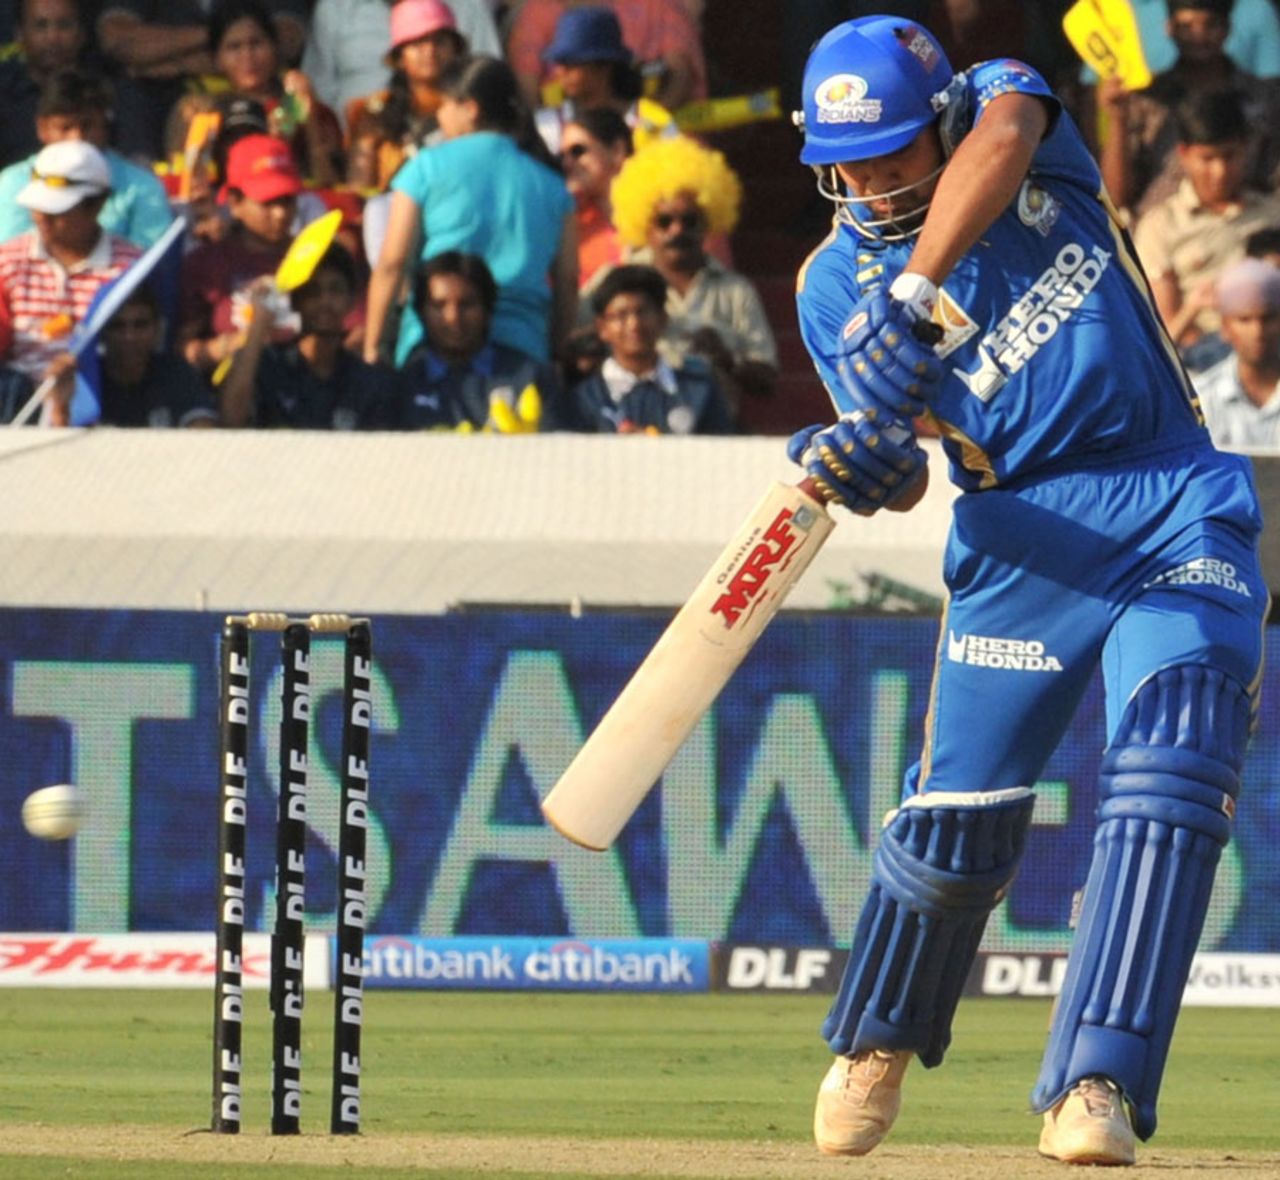 Rohit Sharma drives the ball through the off side, Deccan Chargers v Mumbai Indians, IPL 2011, Hyderabad, April 24, 2011